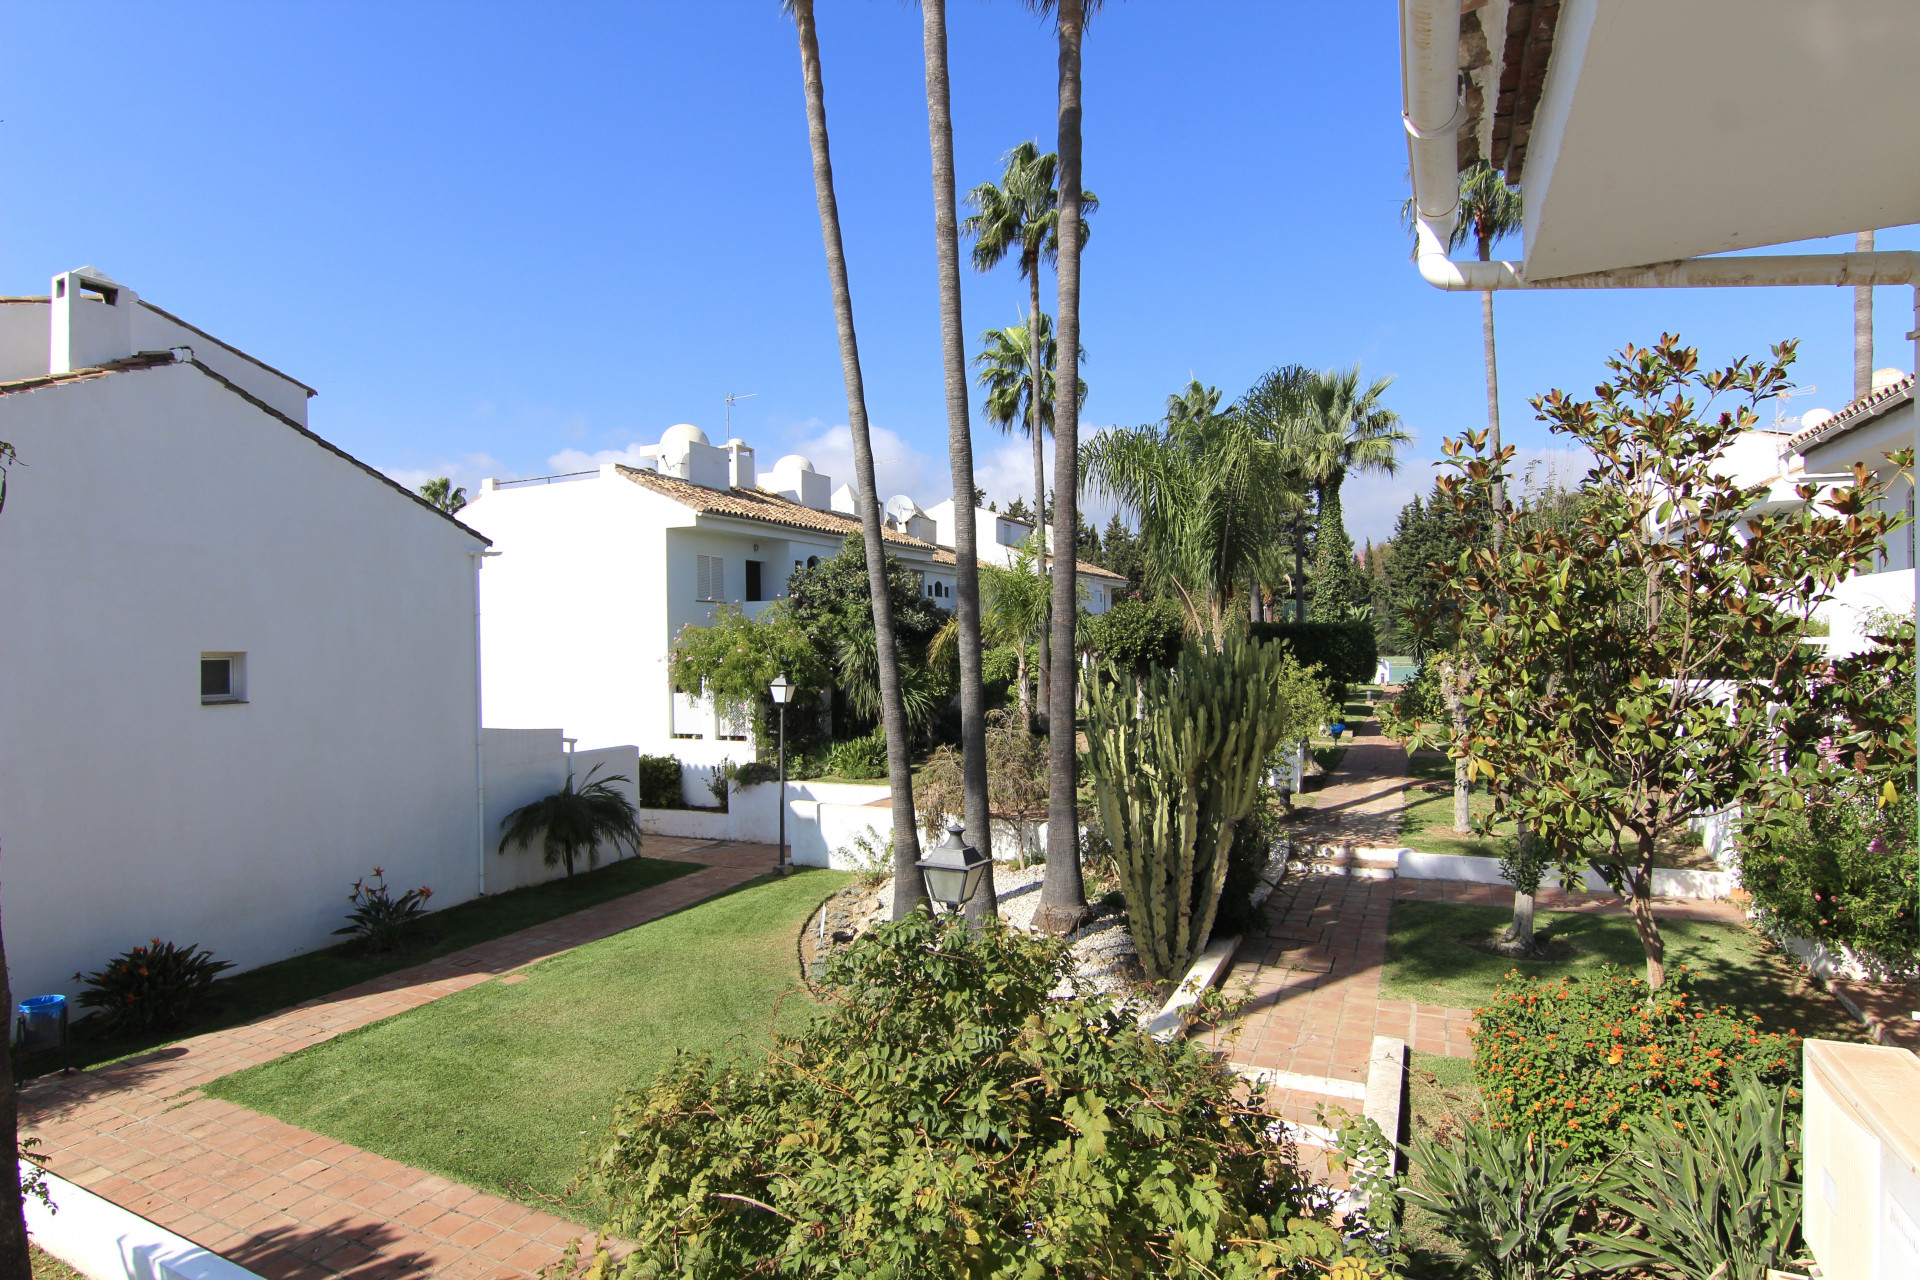 Lovely 4 bedroom townhouse set in a gated community close to every amenity in Atalaya